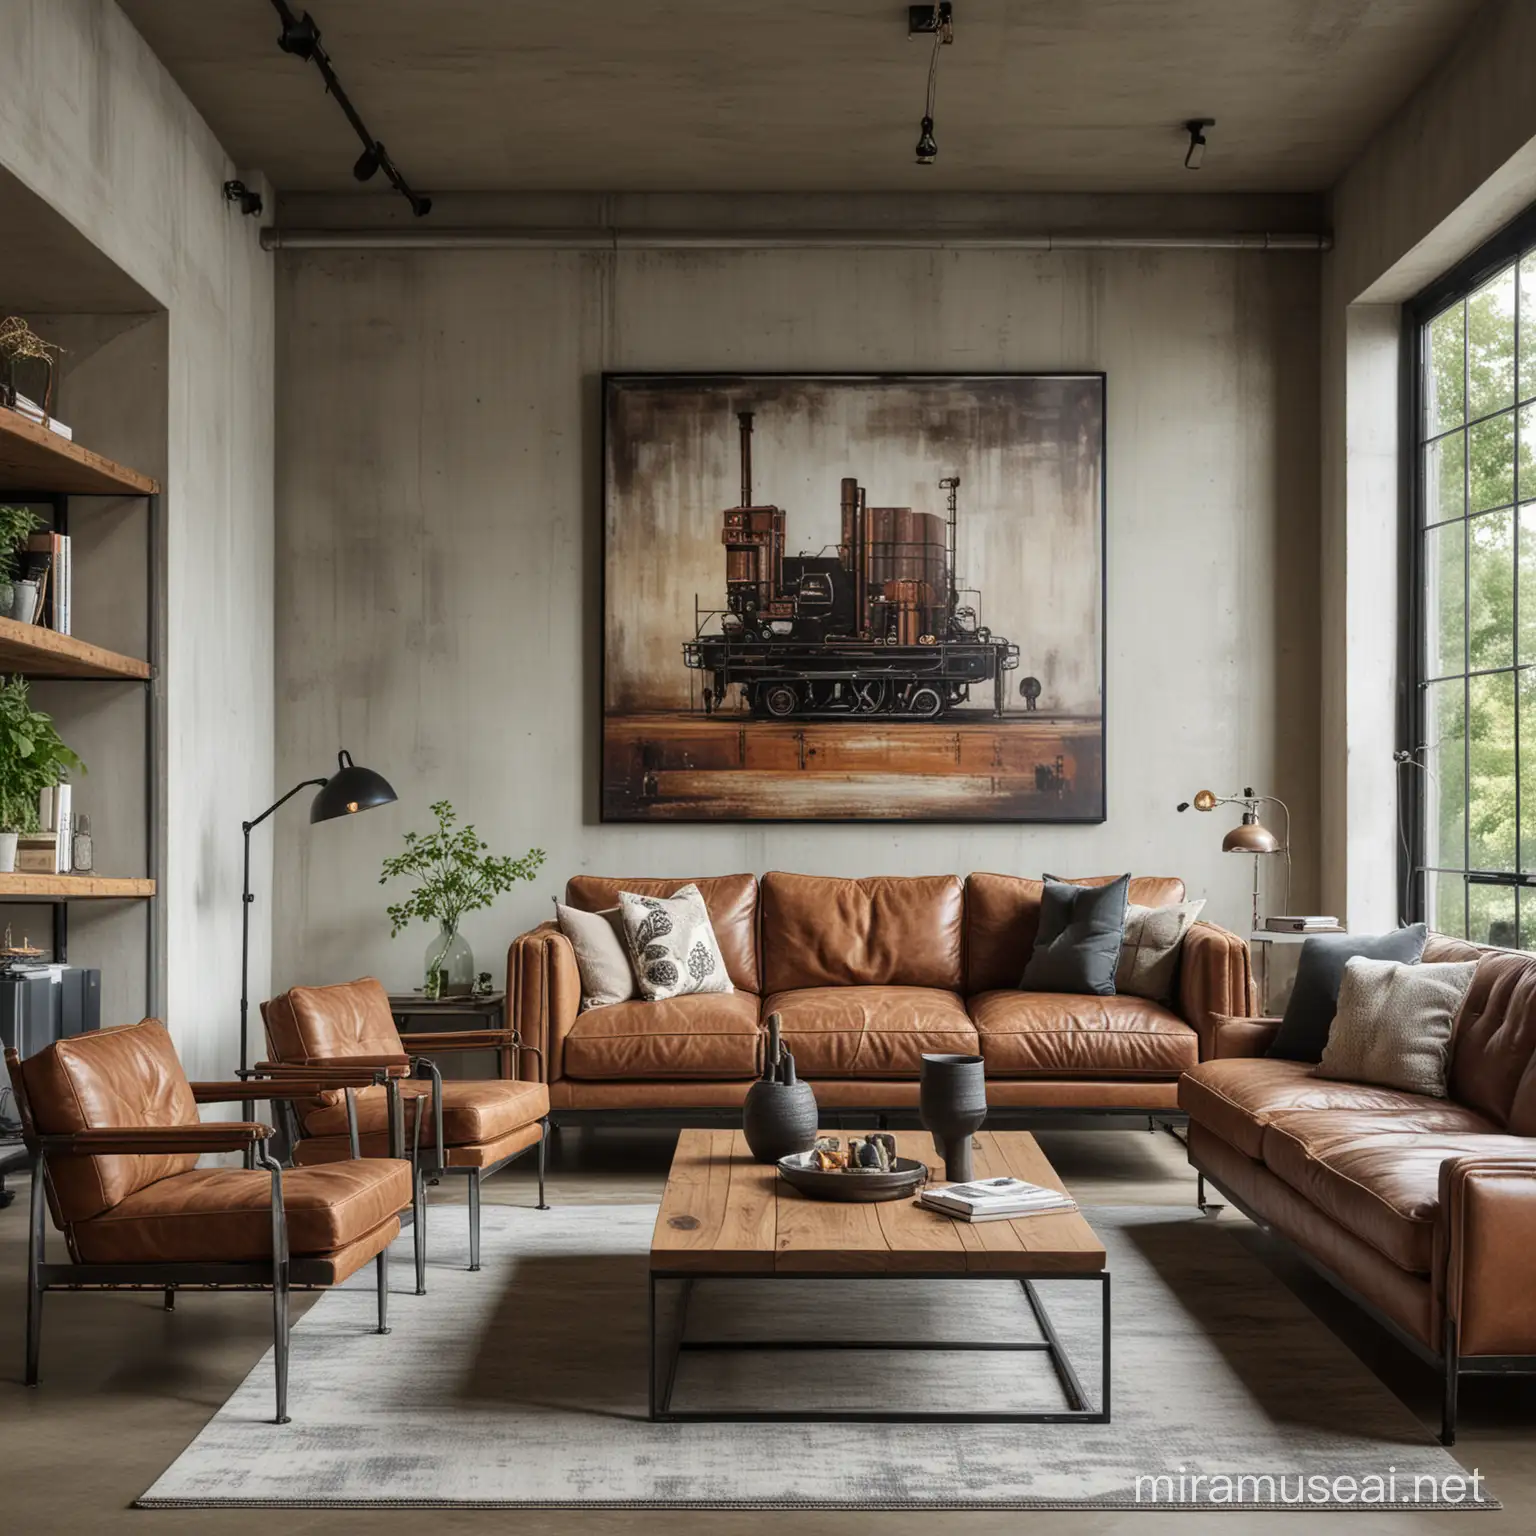 Contemporary Luxury Living Room with Vintage Industrial Dcor and Wall Art